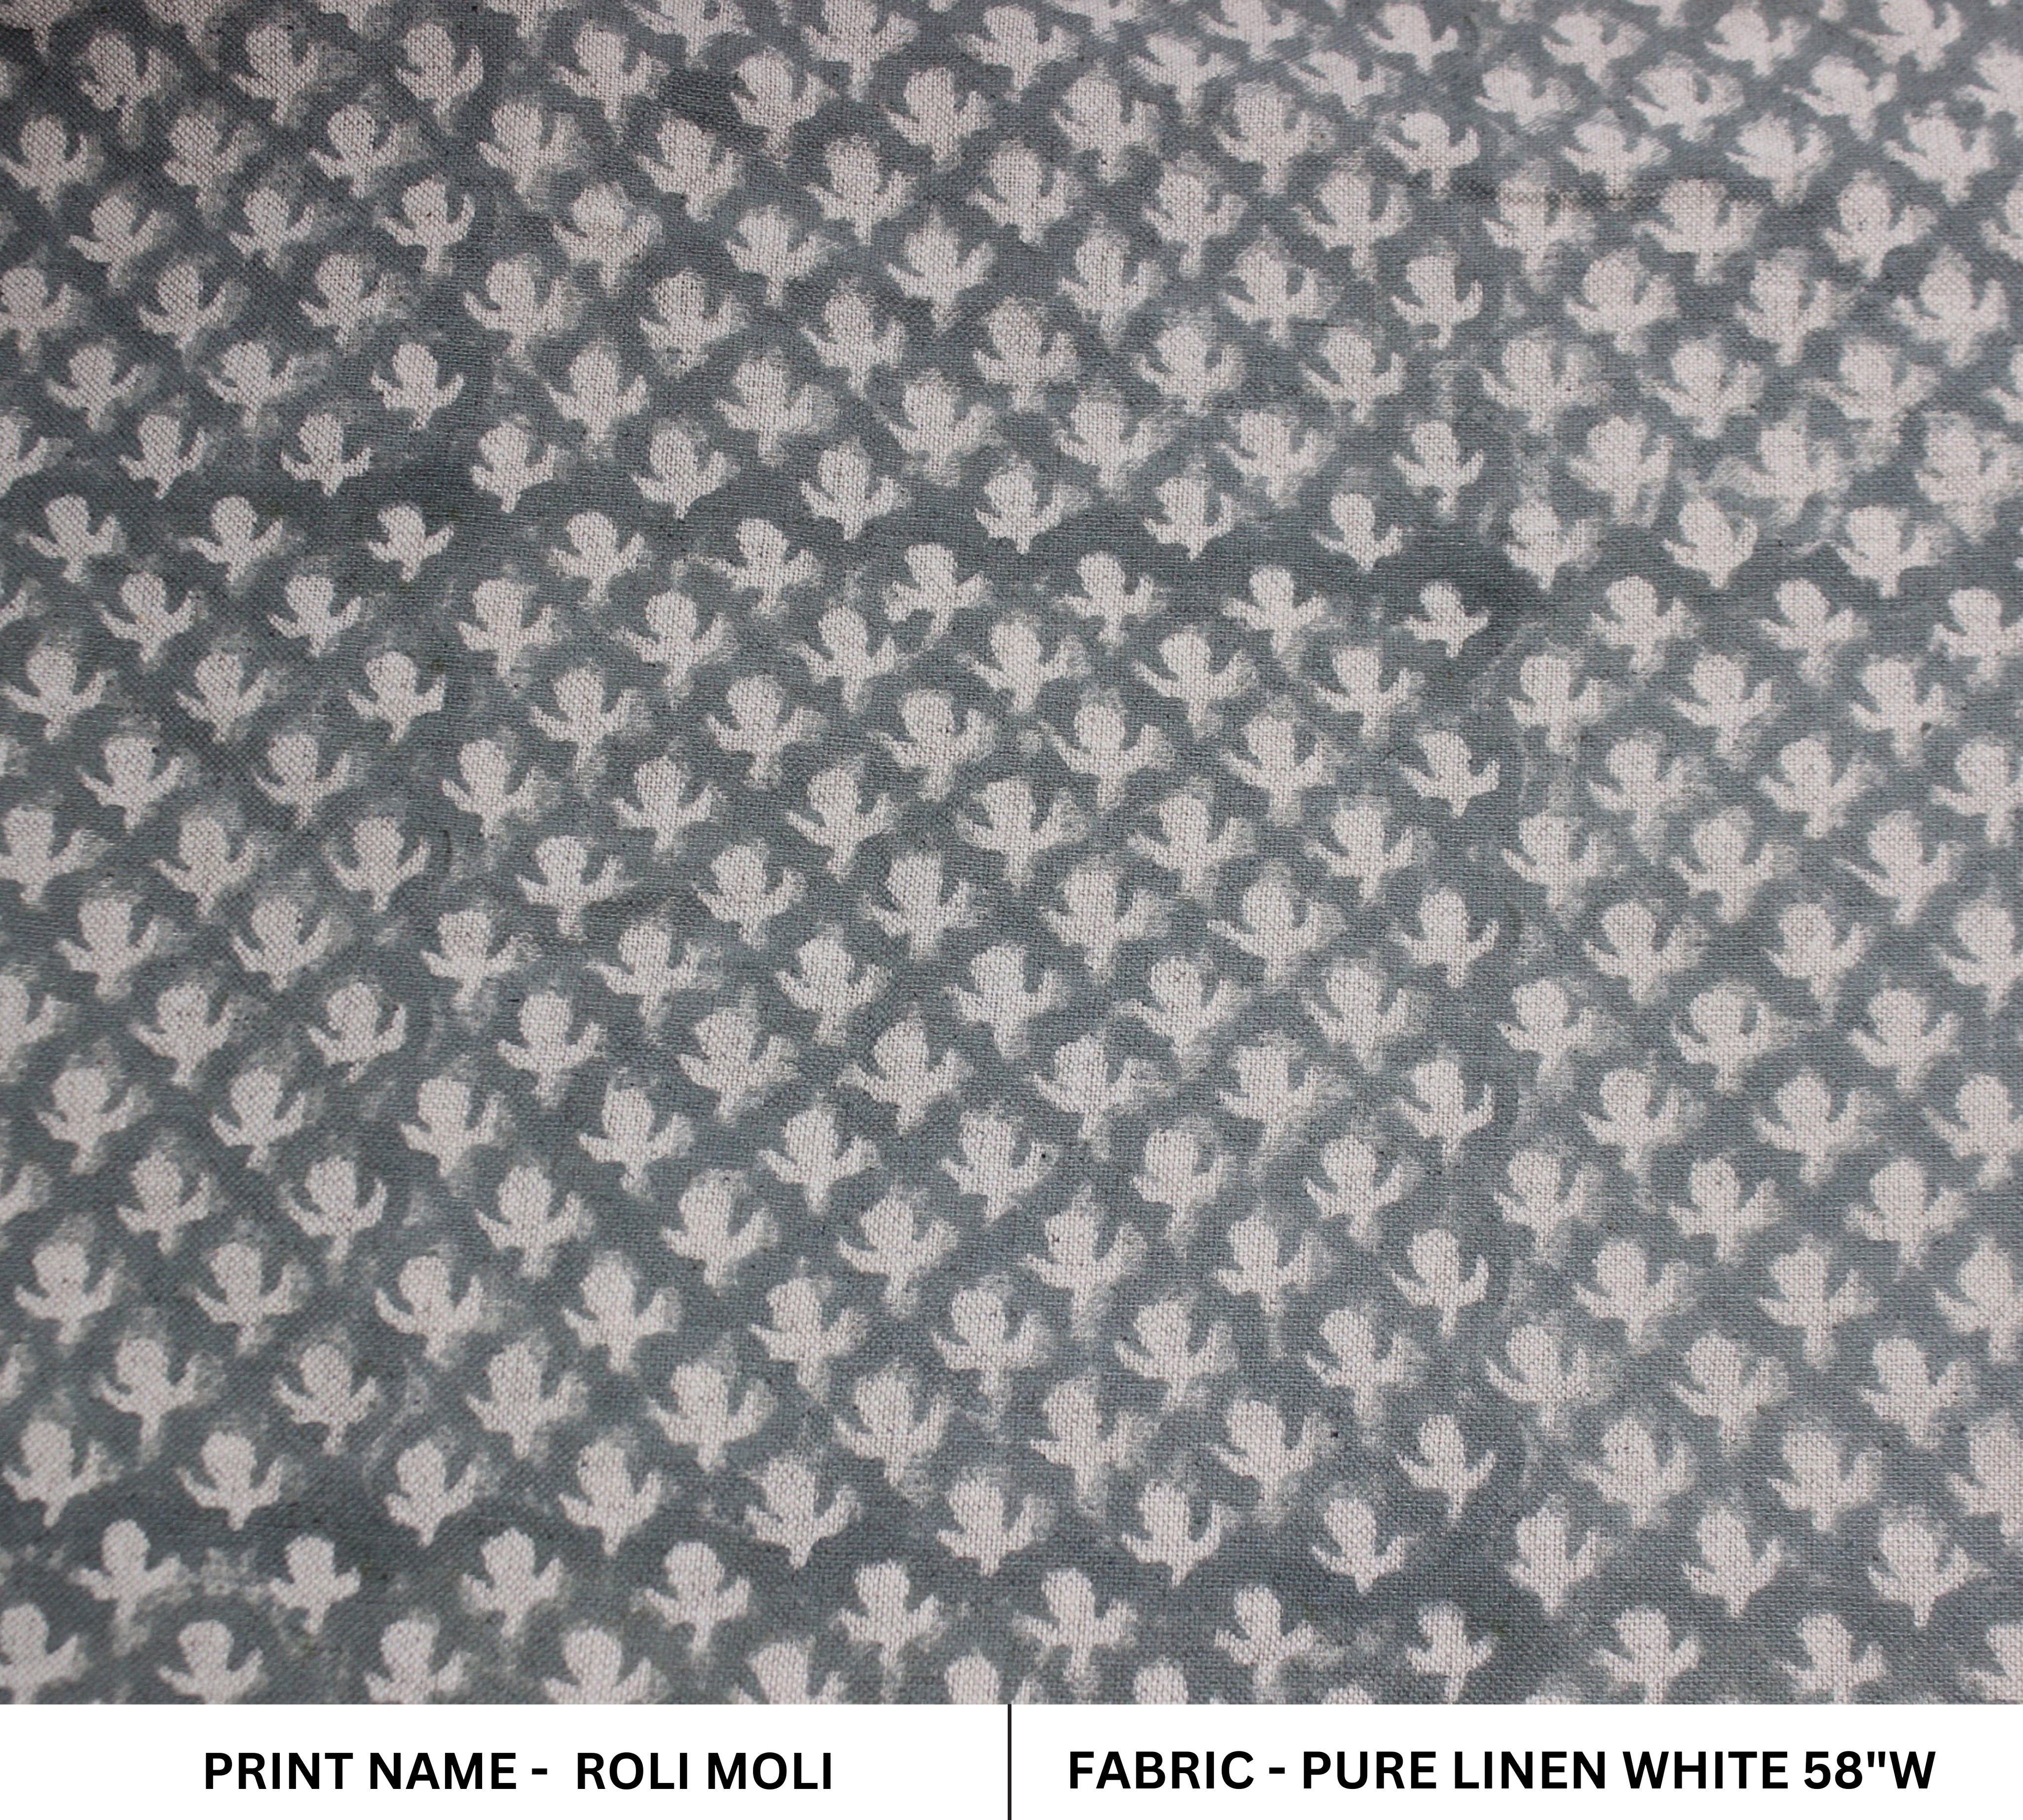 Extra Wide 58" Fabric Perfect For Upholstery, Cushion